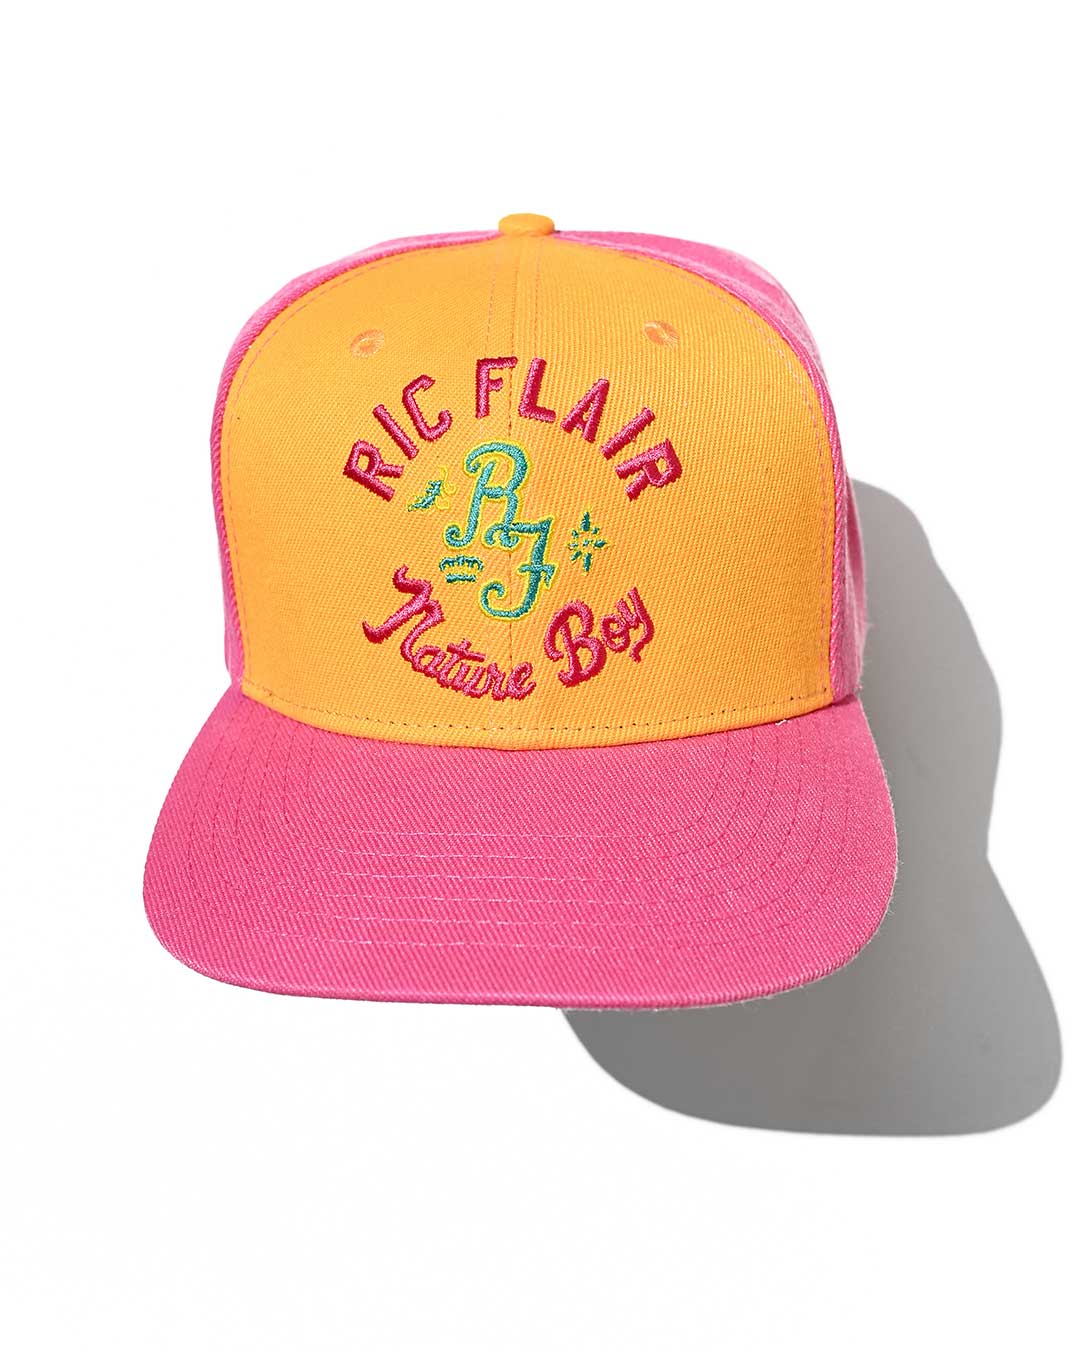 Ric Flair Nature Boy Pink Snapback Hat - Roots of Fight